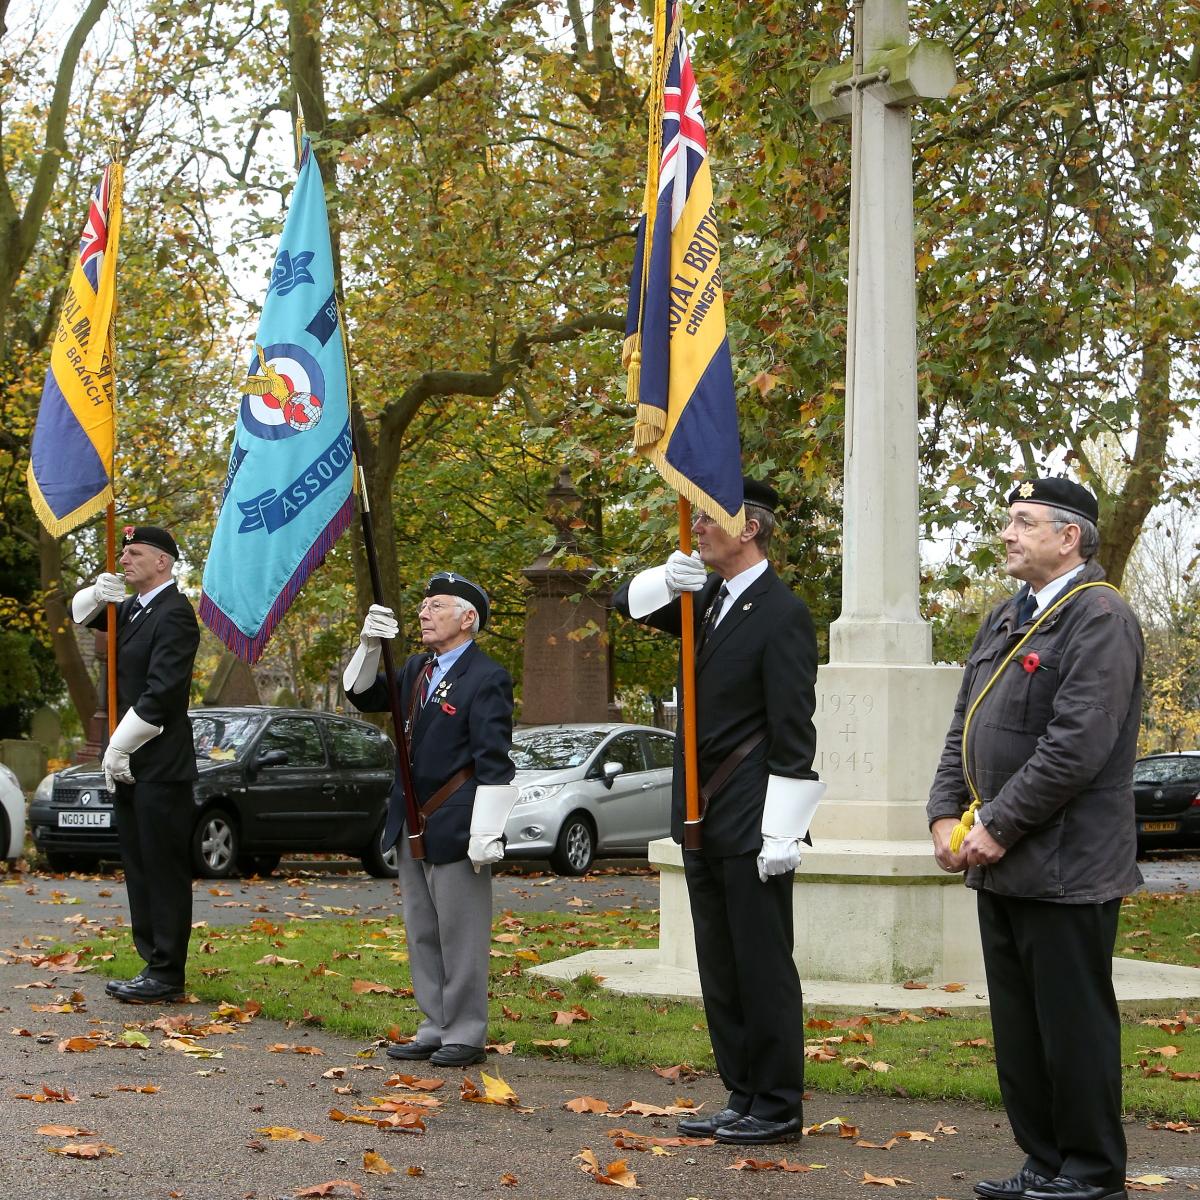 British Legion Remembrance Service at Chingford Mount Cemetery, children from Chingford Foundation, Parkside, Rushcroft and Chace Community from Enfield placed flowers over 200 graves. (6/11/2015) EL86105_8